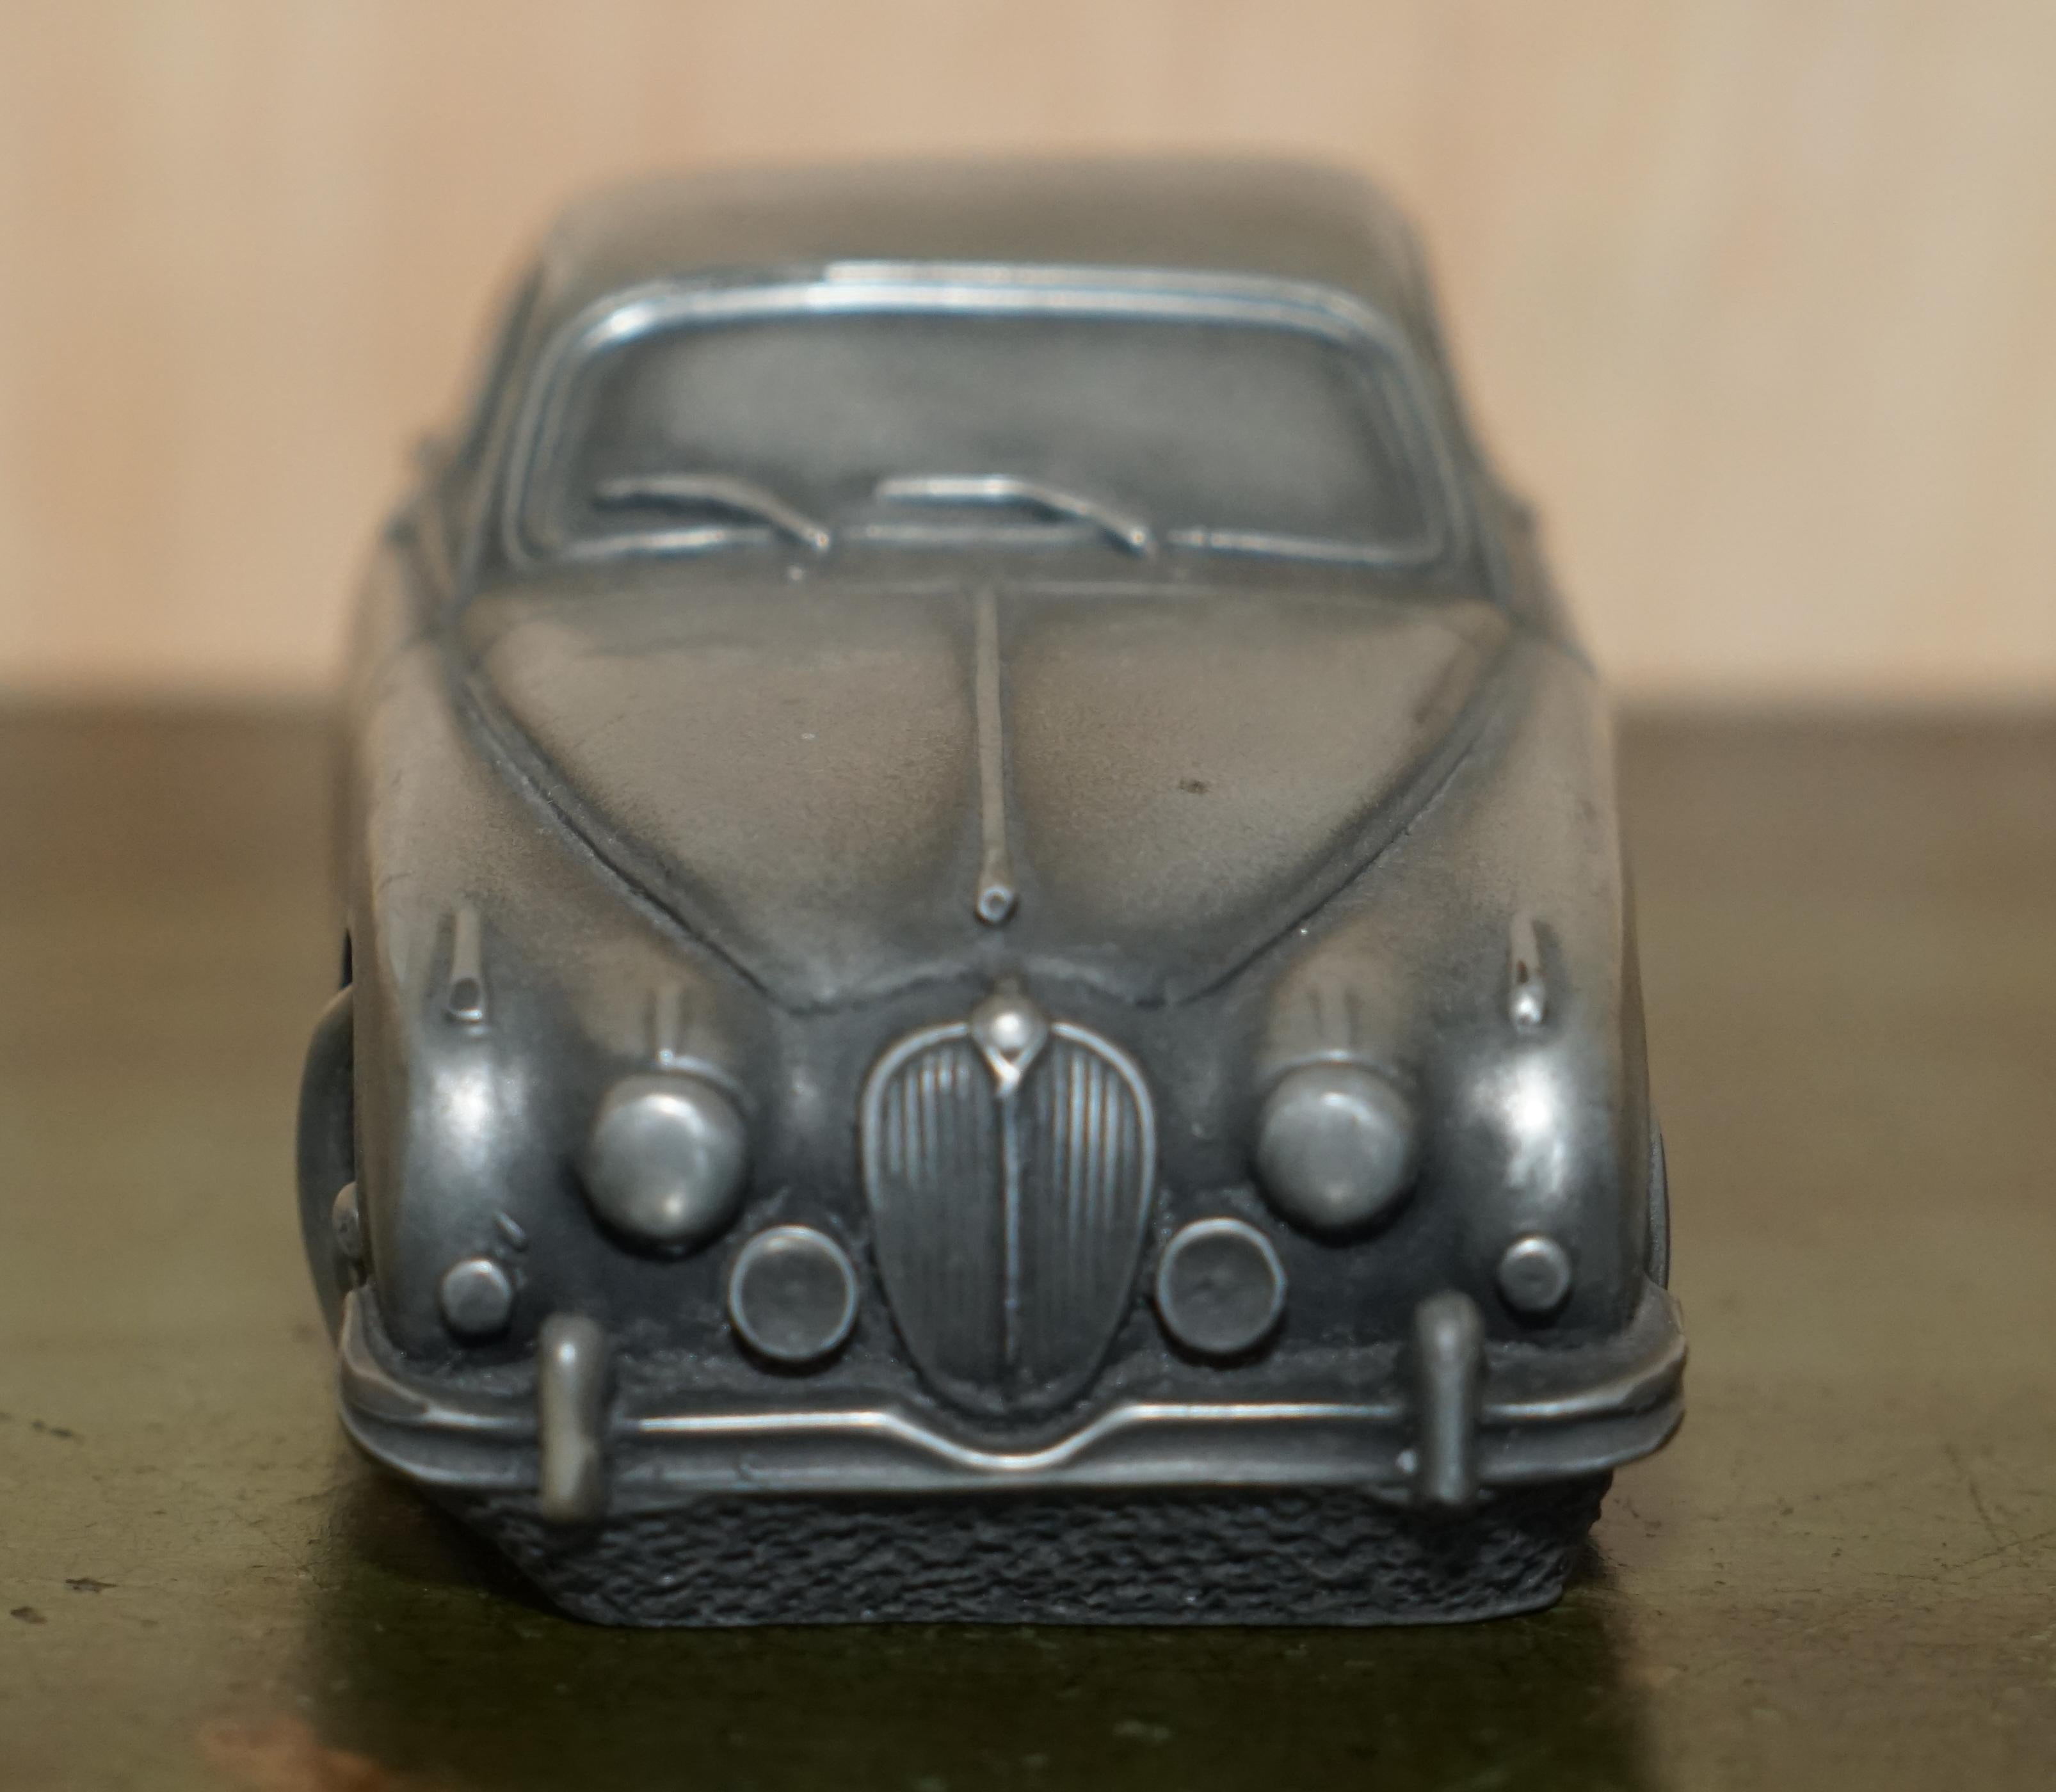 We are delighted to offer for sale this lovely vintage Compulsion Gallery Pewter model of a Jaguar Mark I made in 1955-1959

This is one of the sleekest and most elegant cars ever made, it was produced during 1955-1959, can you imagine post war